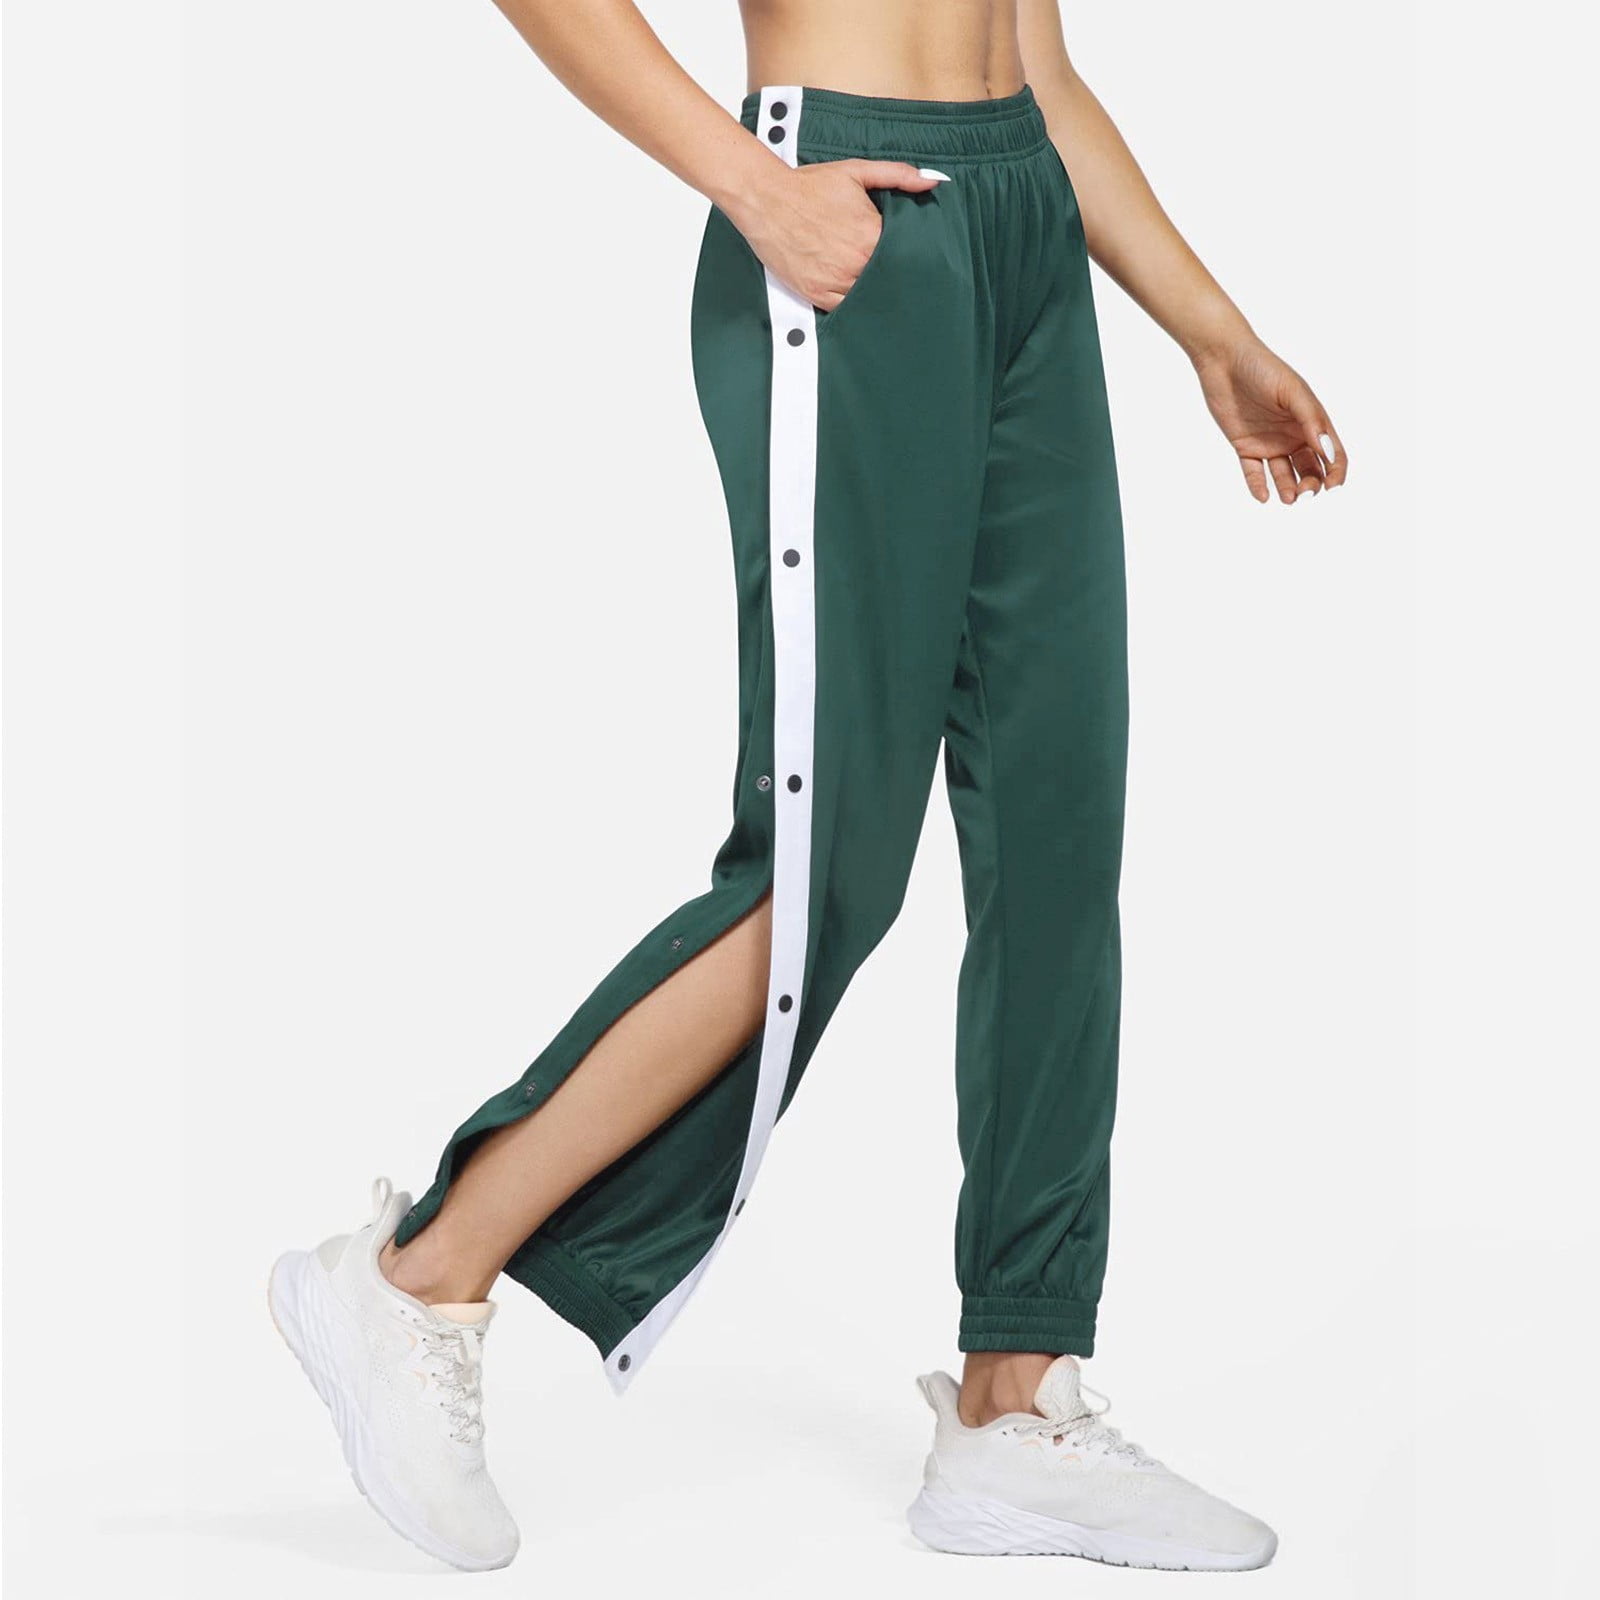 Women's Pant Women's Tear Away Warm Up Pants Active Workout Tapered  Sweatpants With Pockets Green M 